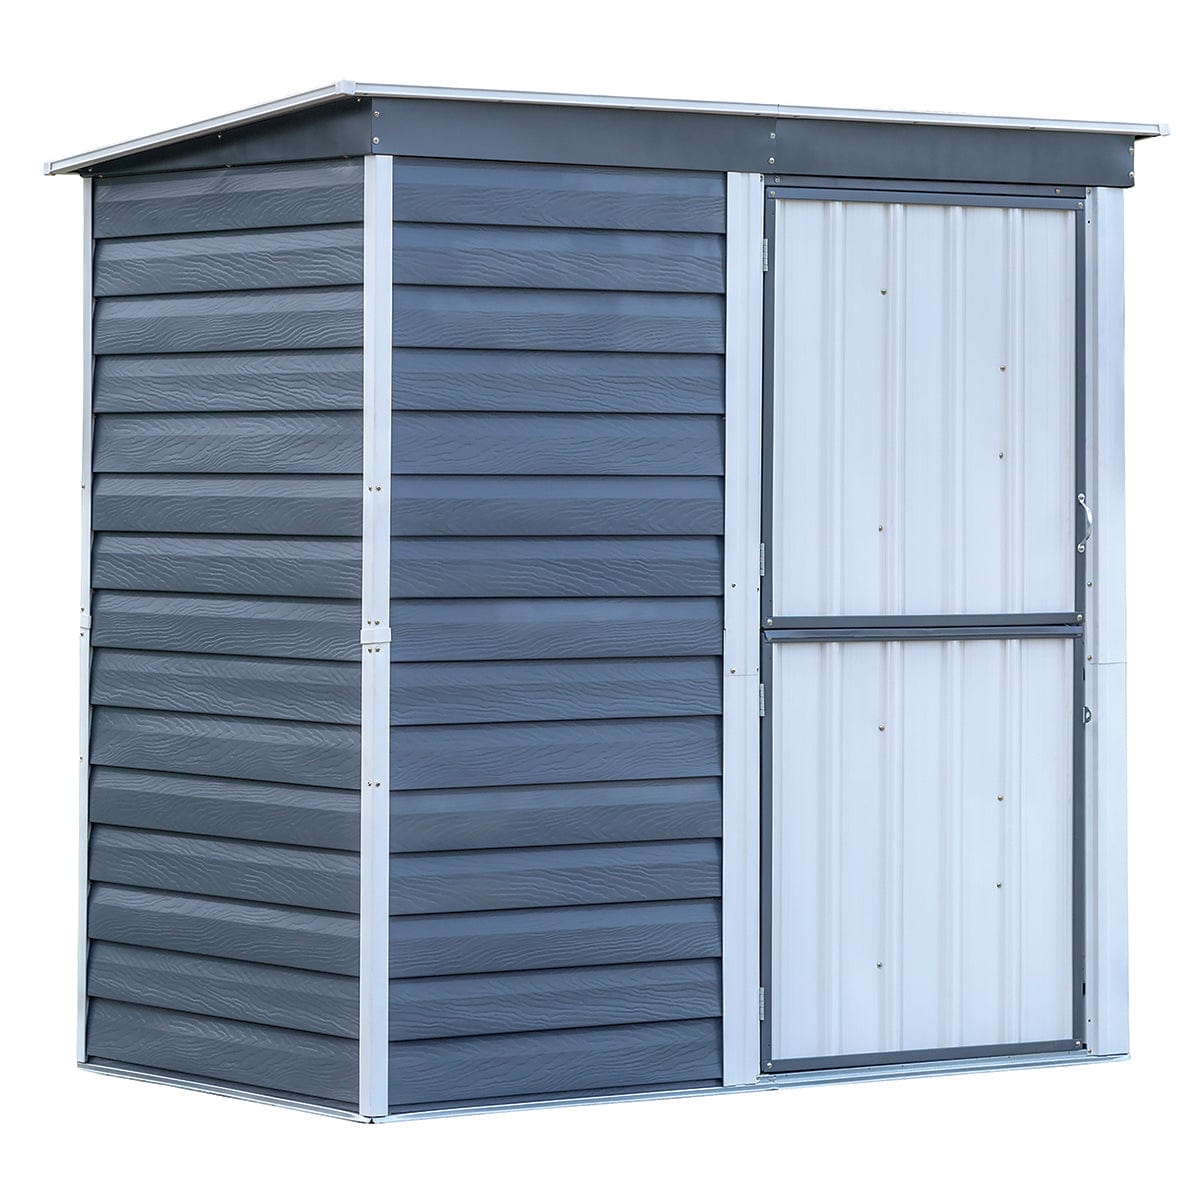 ShelterLogic Shed-in-a-Box 6 Ft. x 4 Ft. Steel Storage Shed